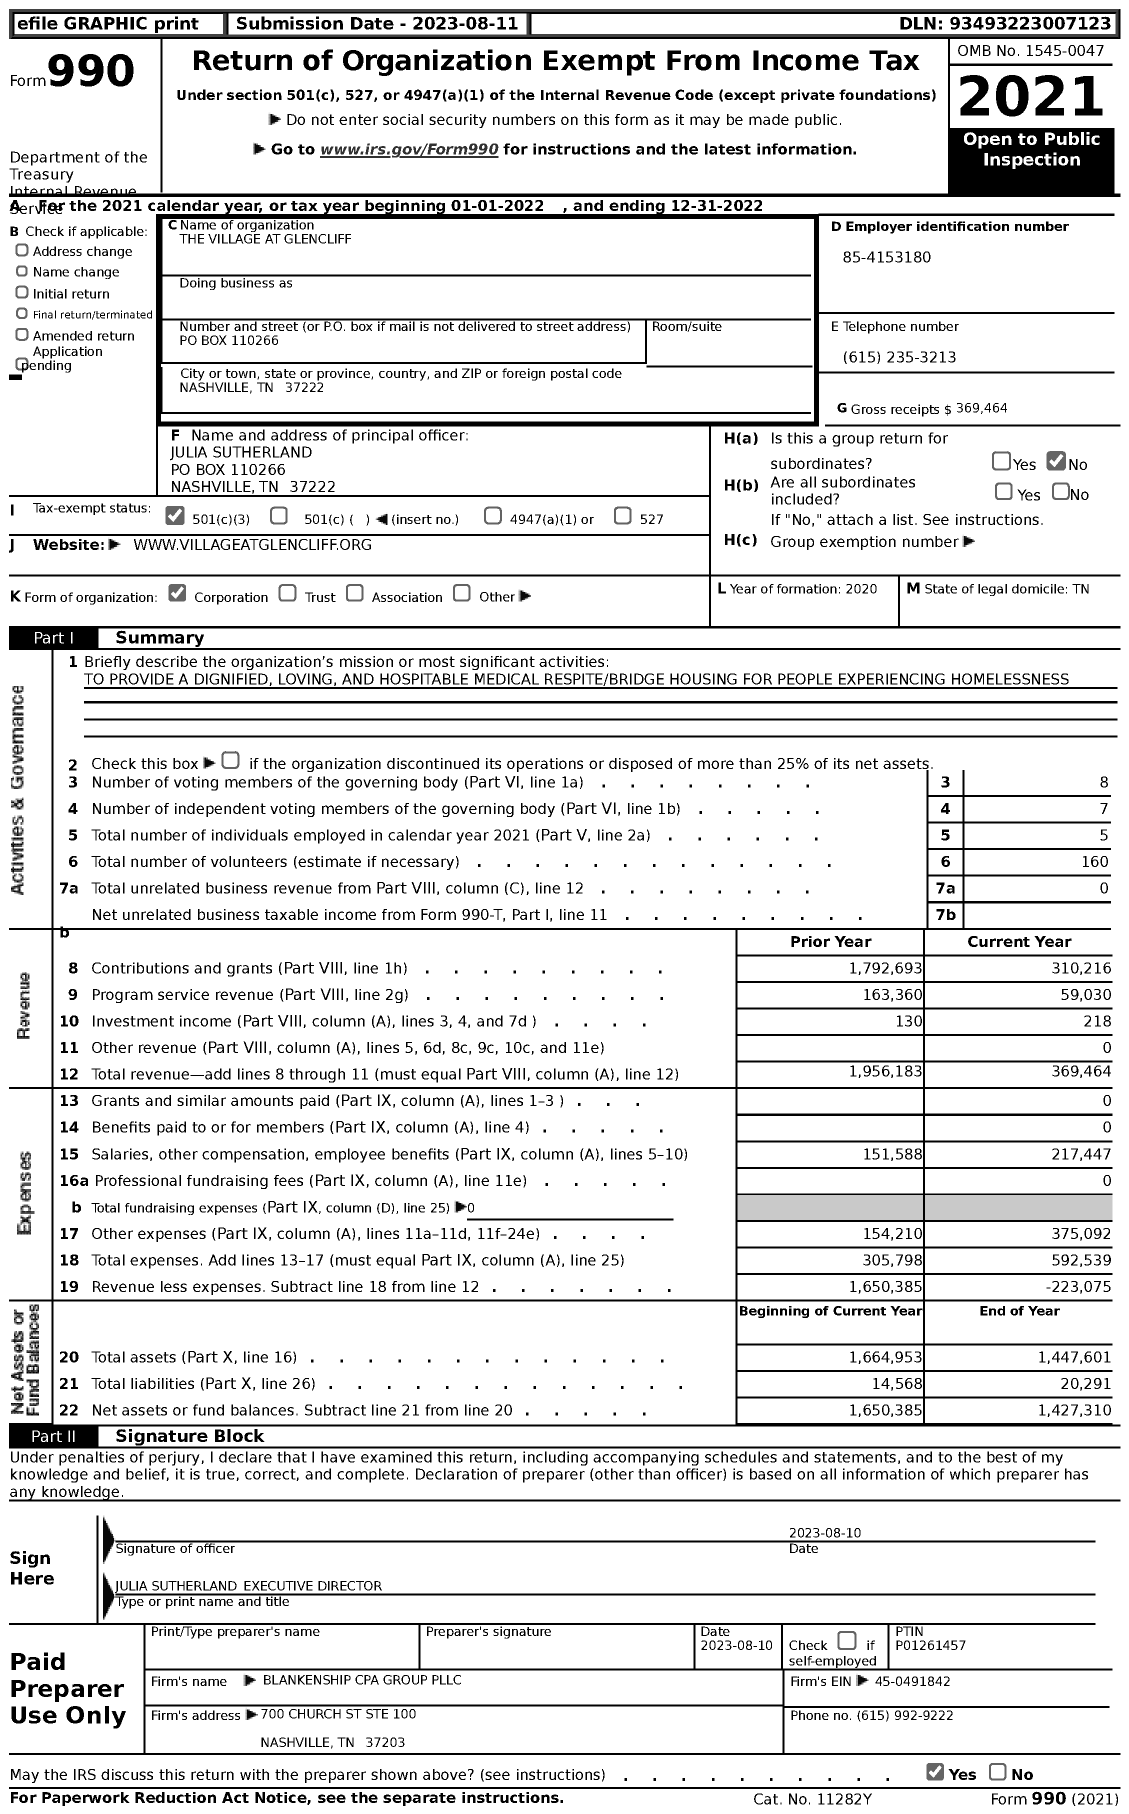 Image of first page of 2022 Form 990 for The Village at Glencliff